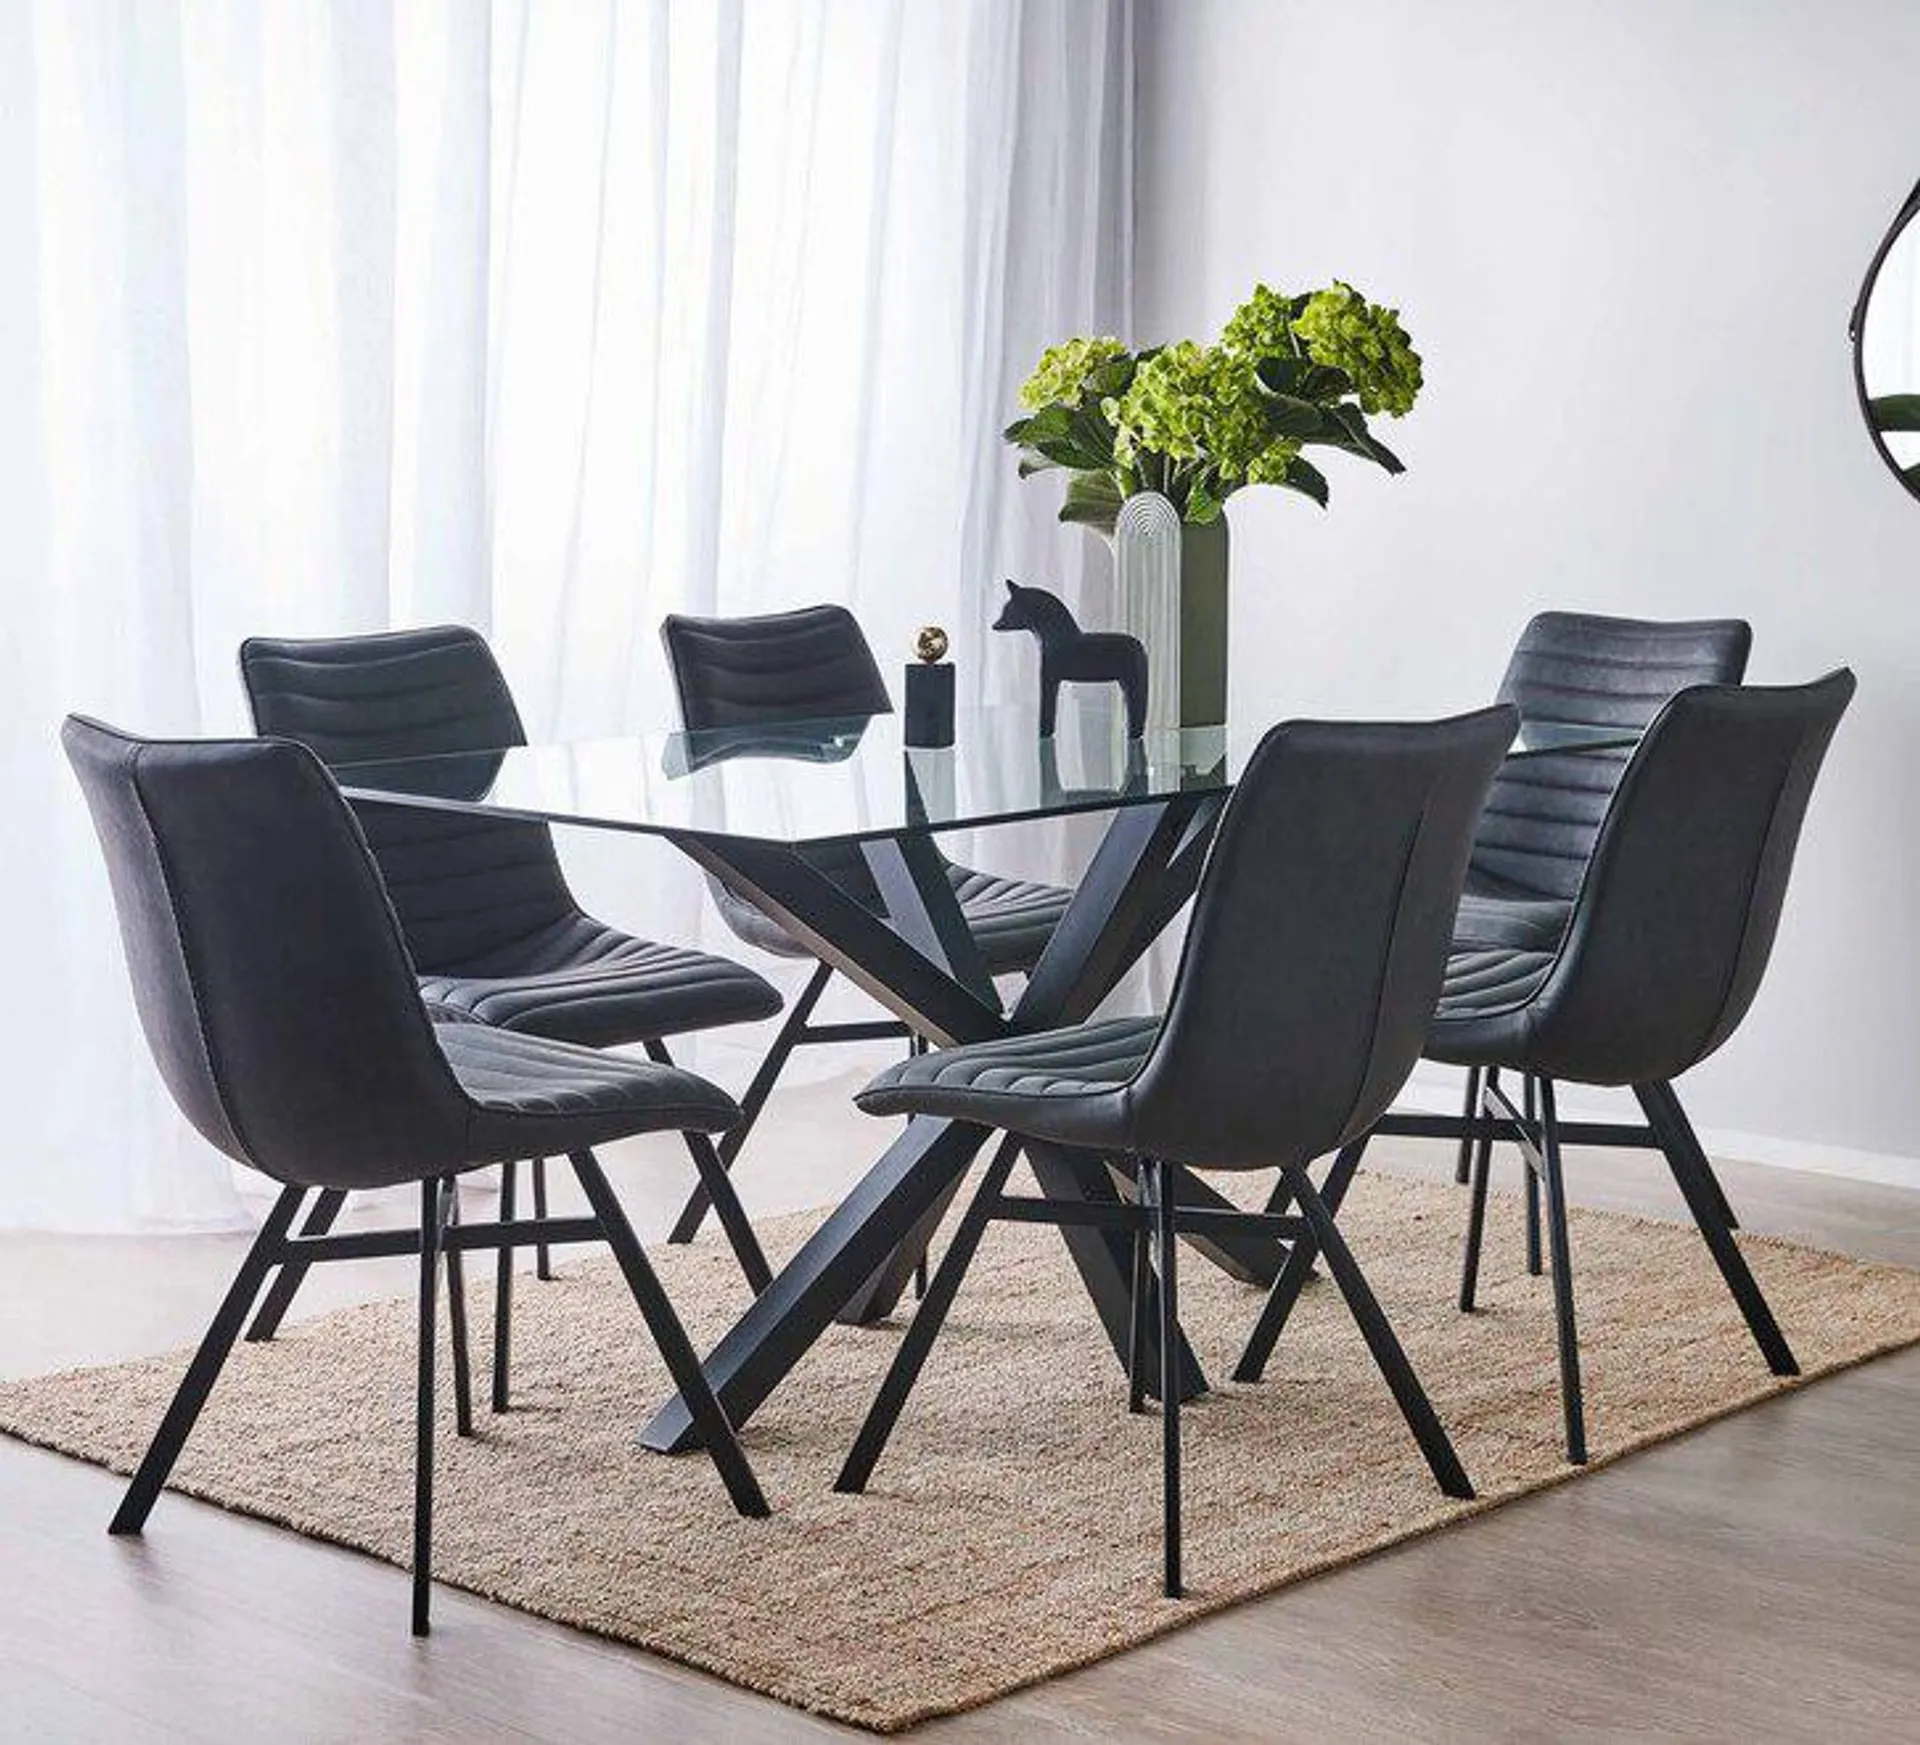 Blakely 6 Seater Dining Table